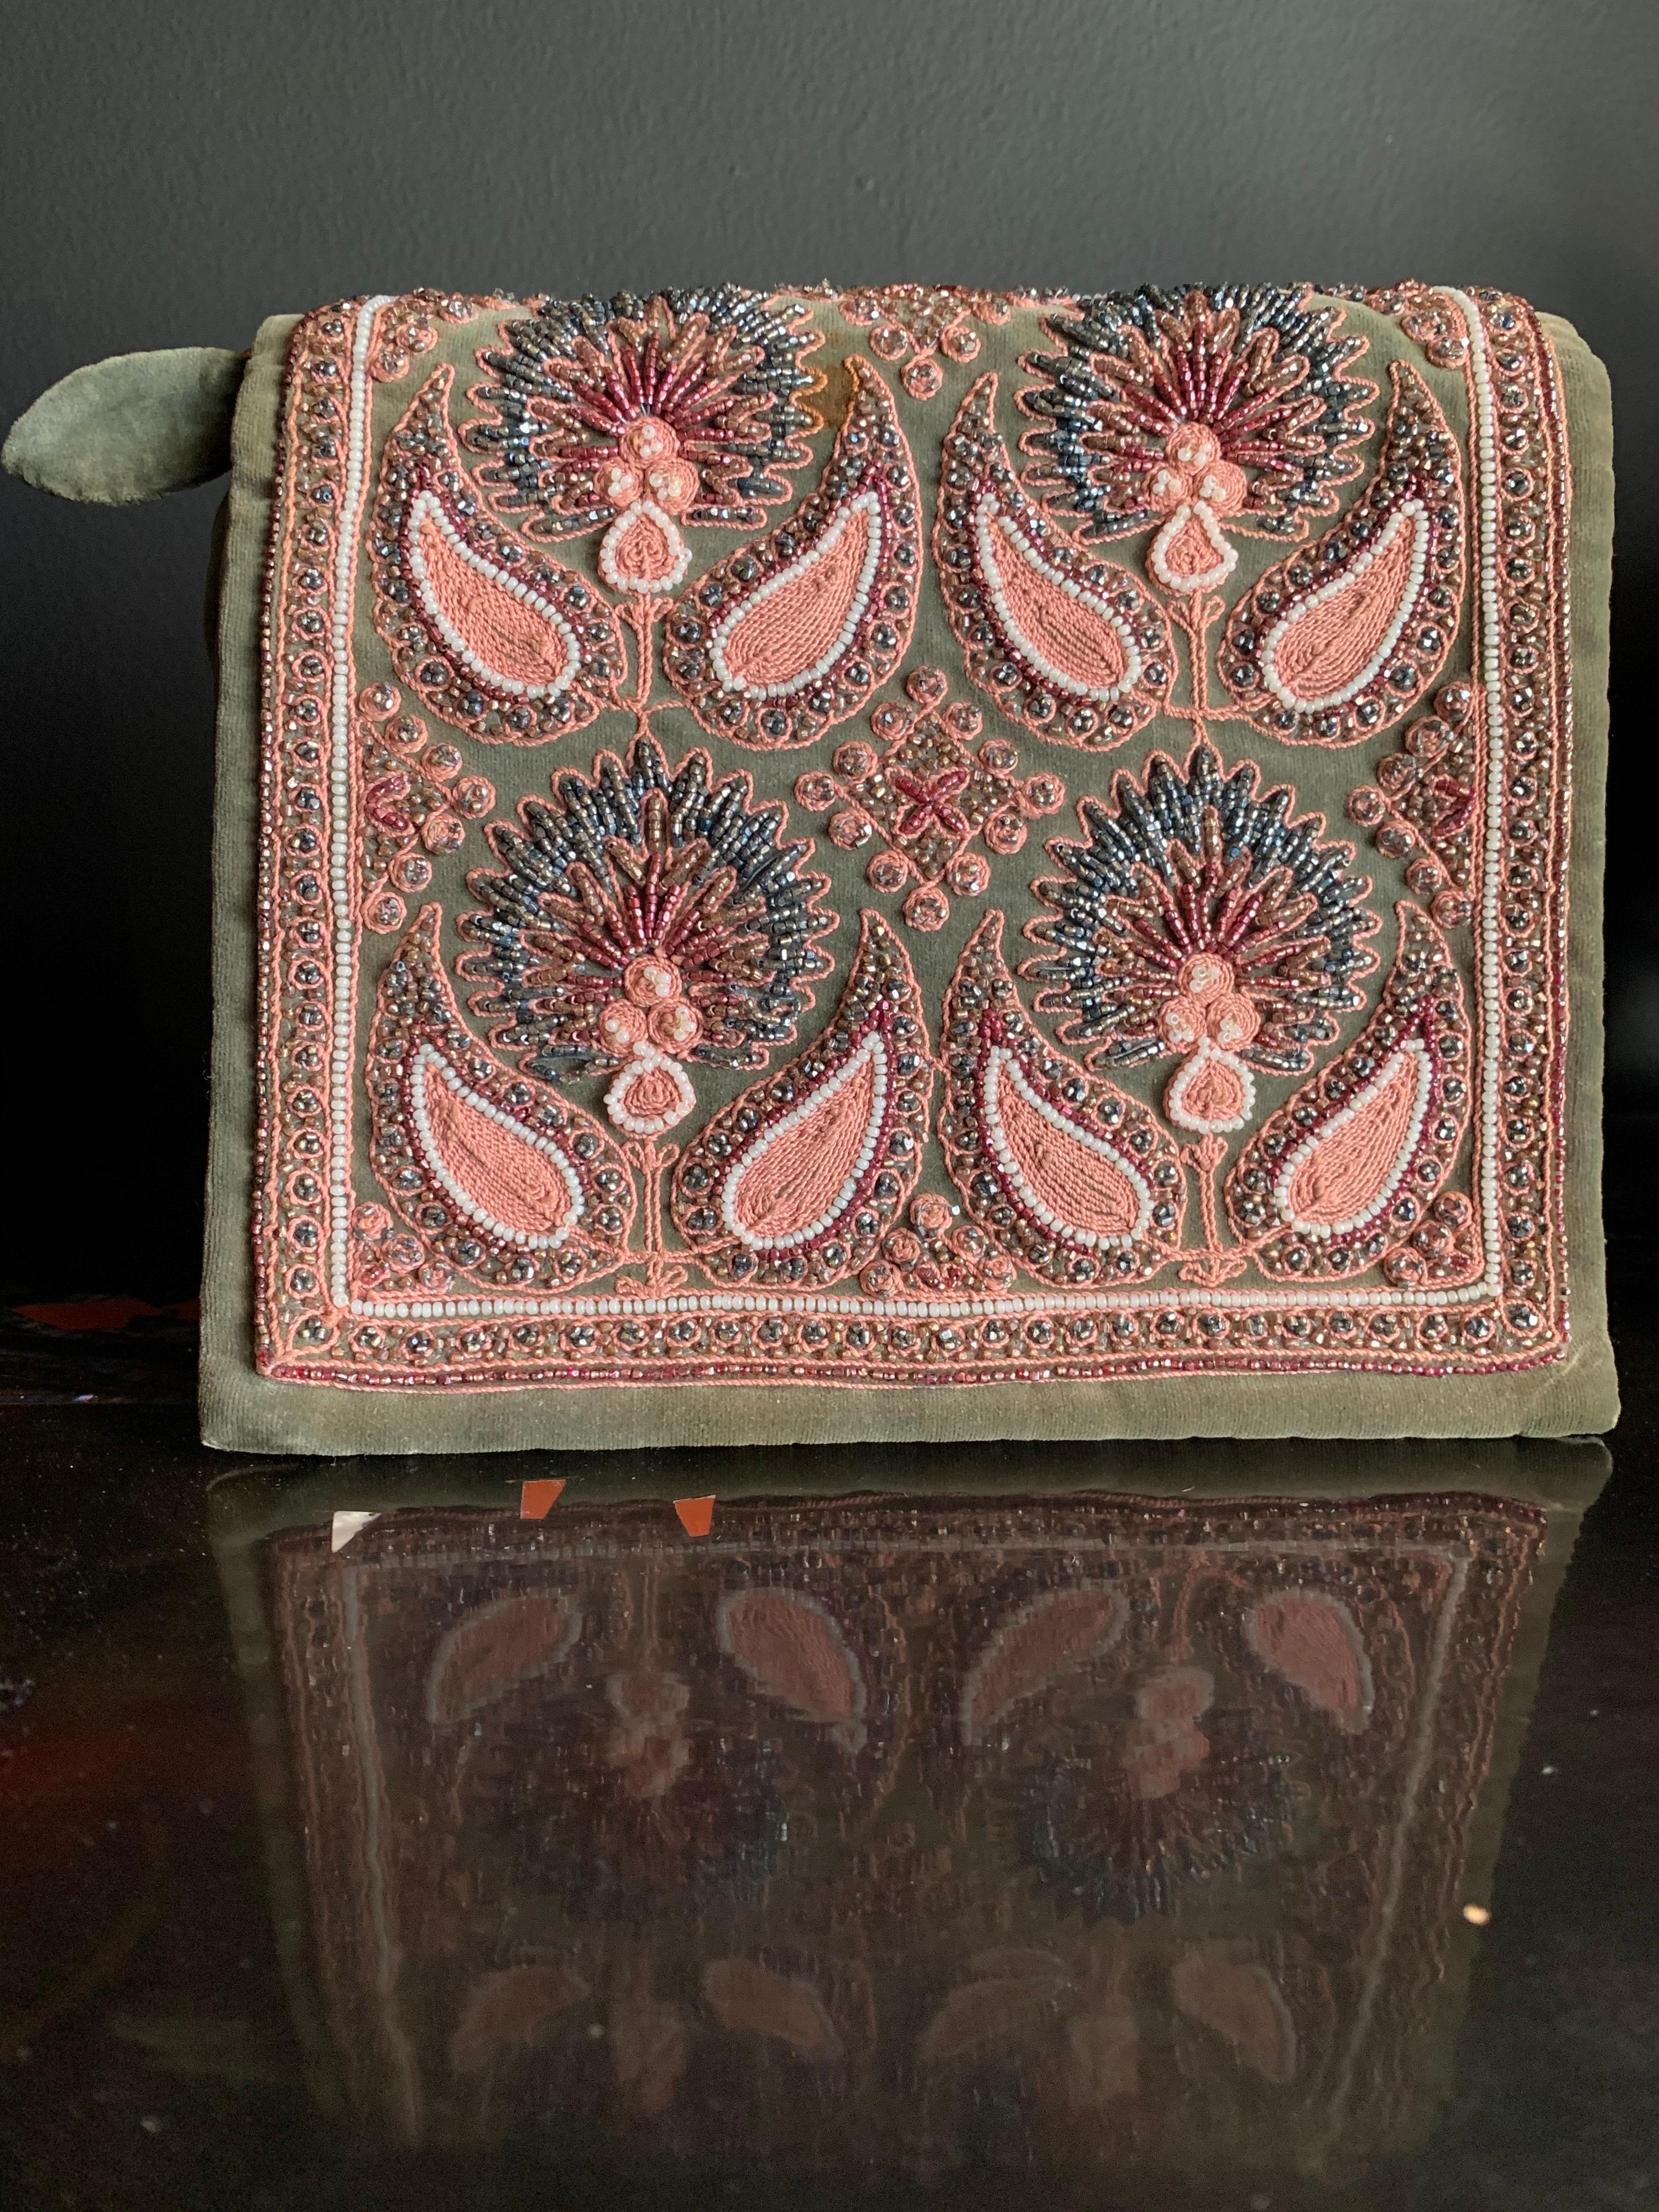 1940s Harry Rosenfeld Sage Velvet Envelope Clutch W/ Beaded & Embroidered Flap In Good Condition For Sale In Gresham, OR